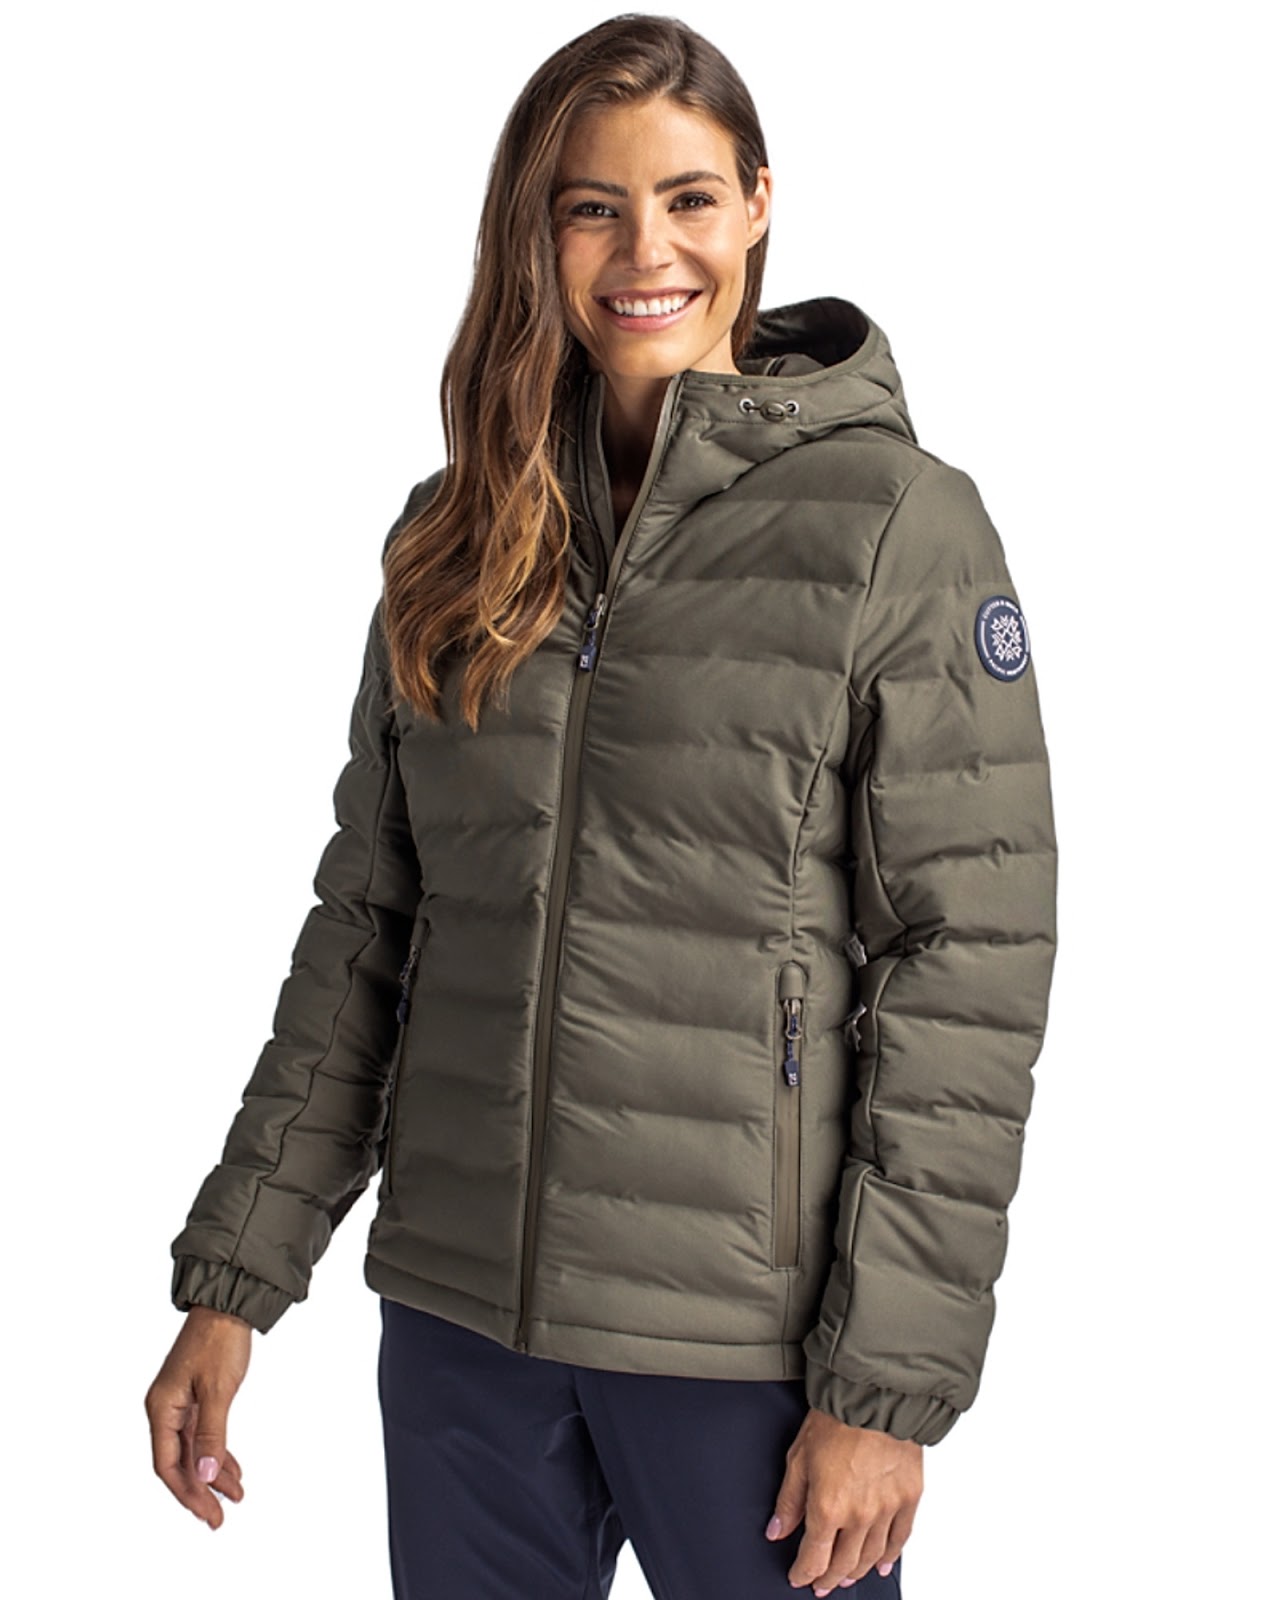 Best women's insulated puffer jacket gift for 2023